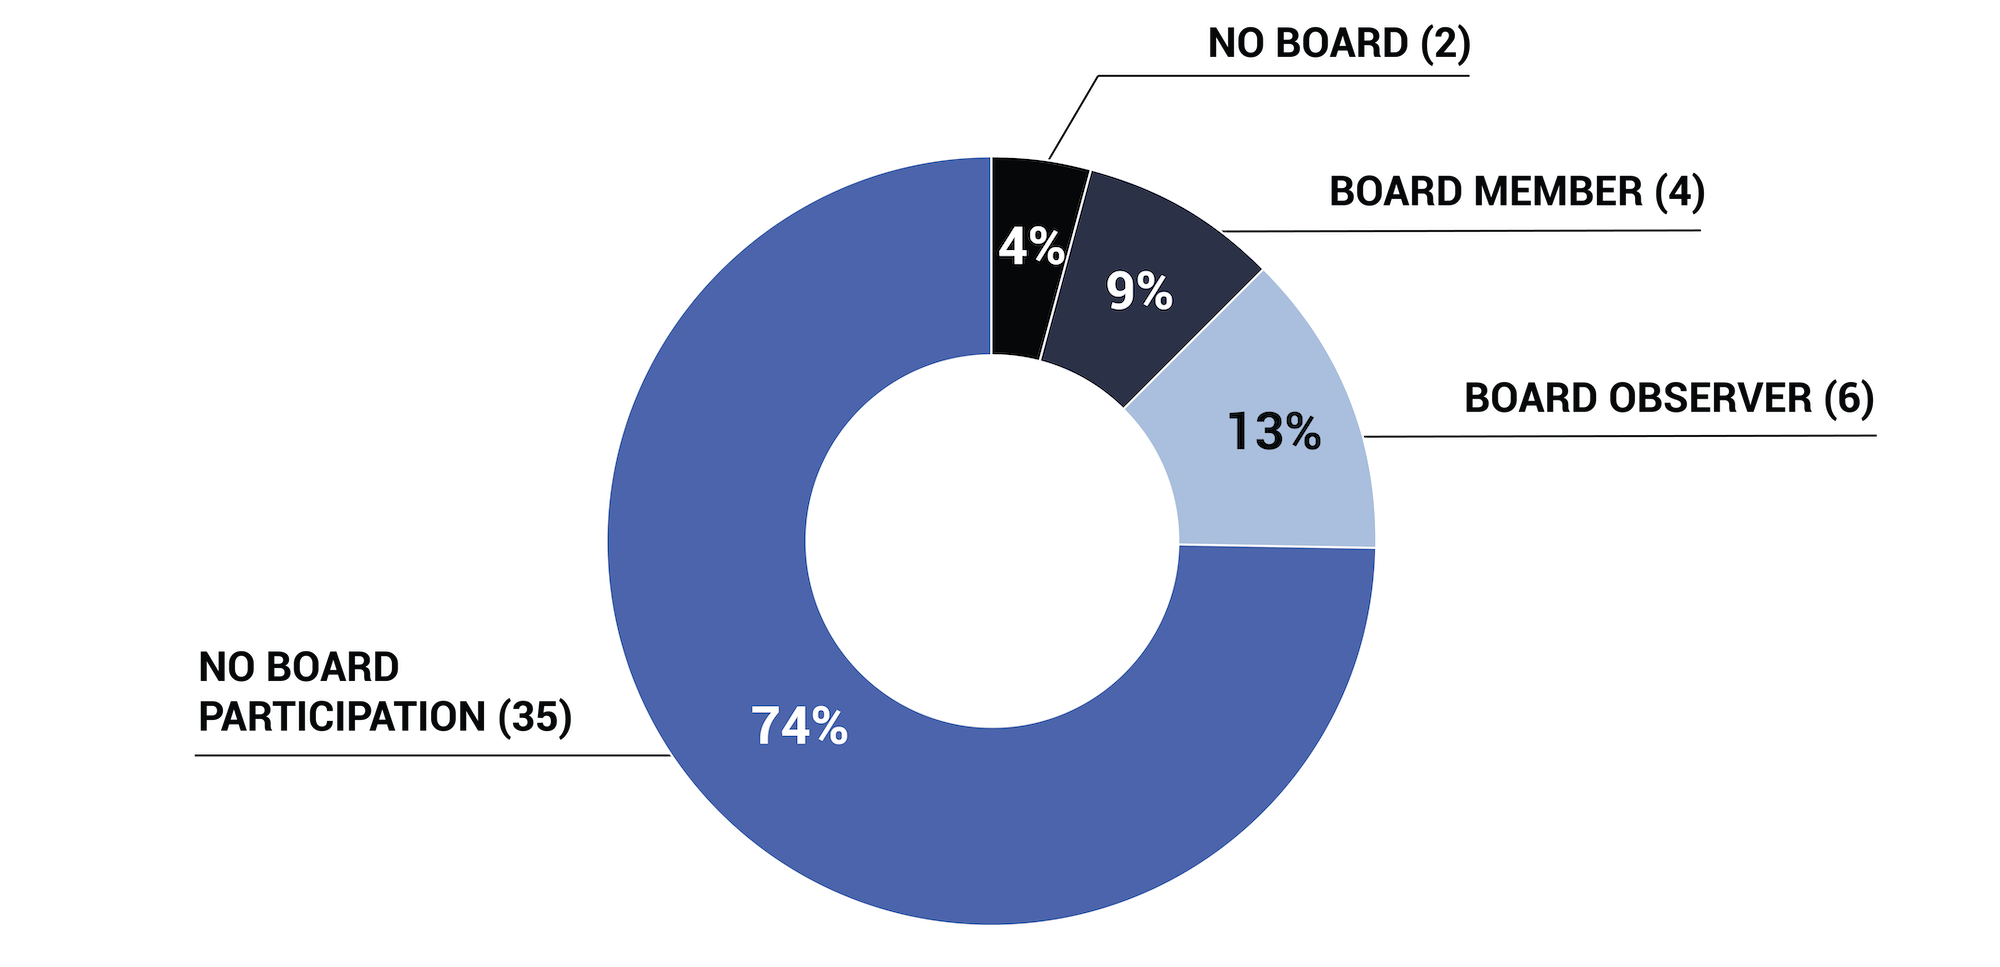 Figure 9 is a donut chart illustrating the number and percent of survey participants based on their Luminate board participation.